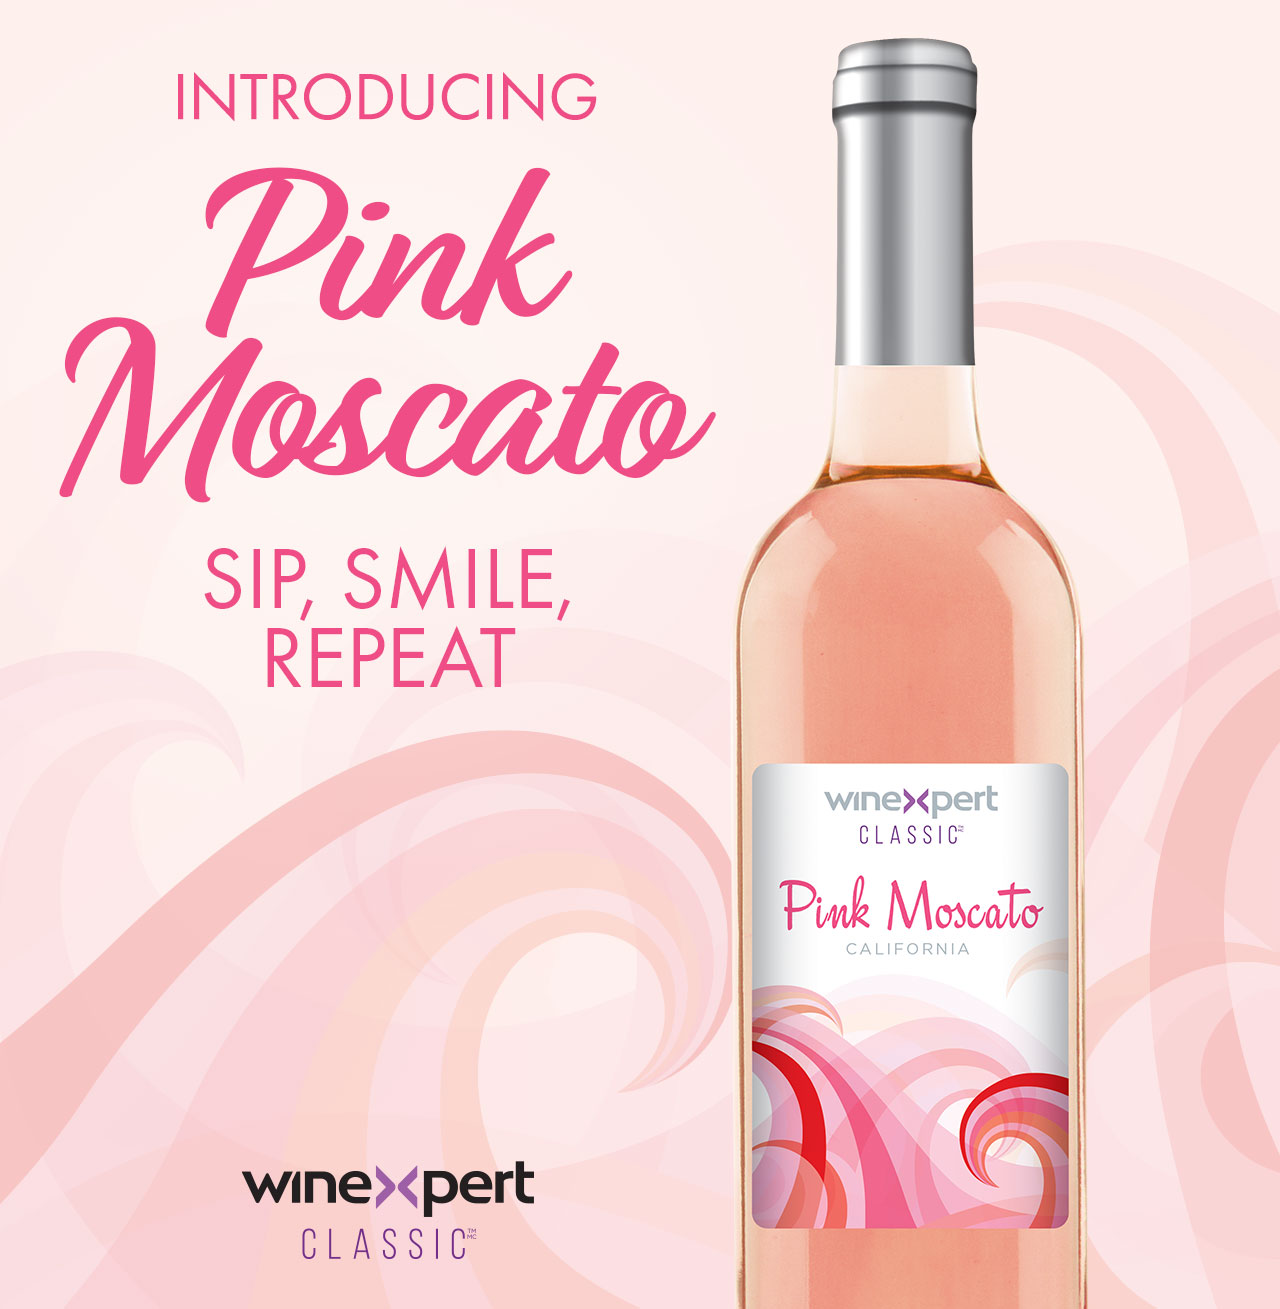 Pre-Order Winexpert Pink Moscato Today